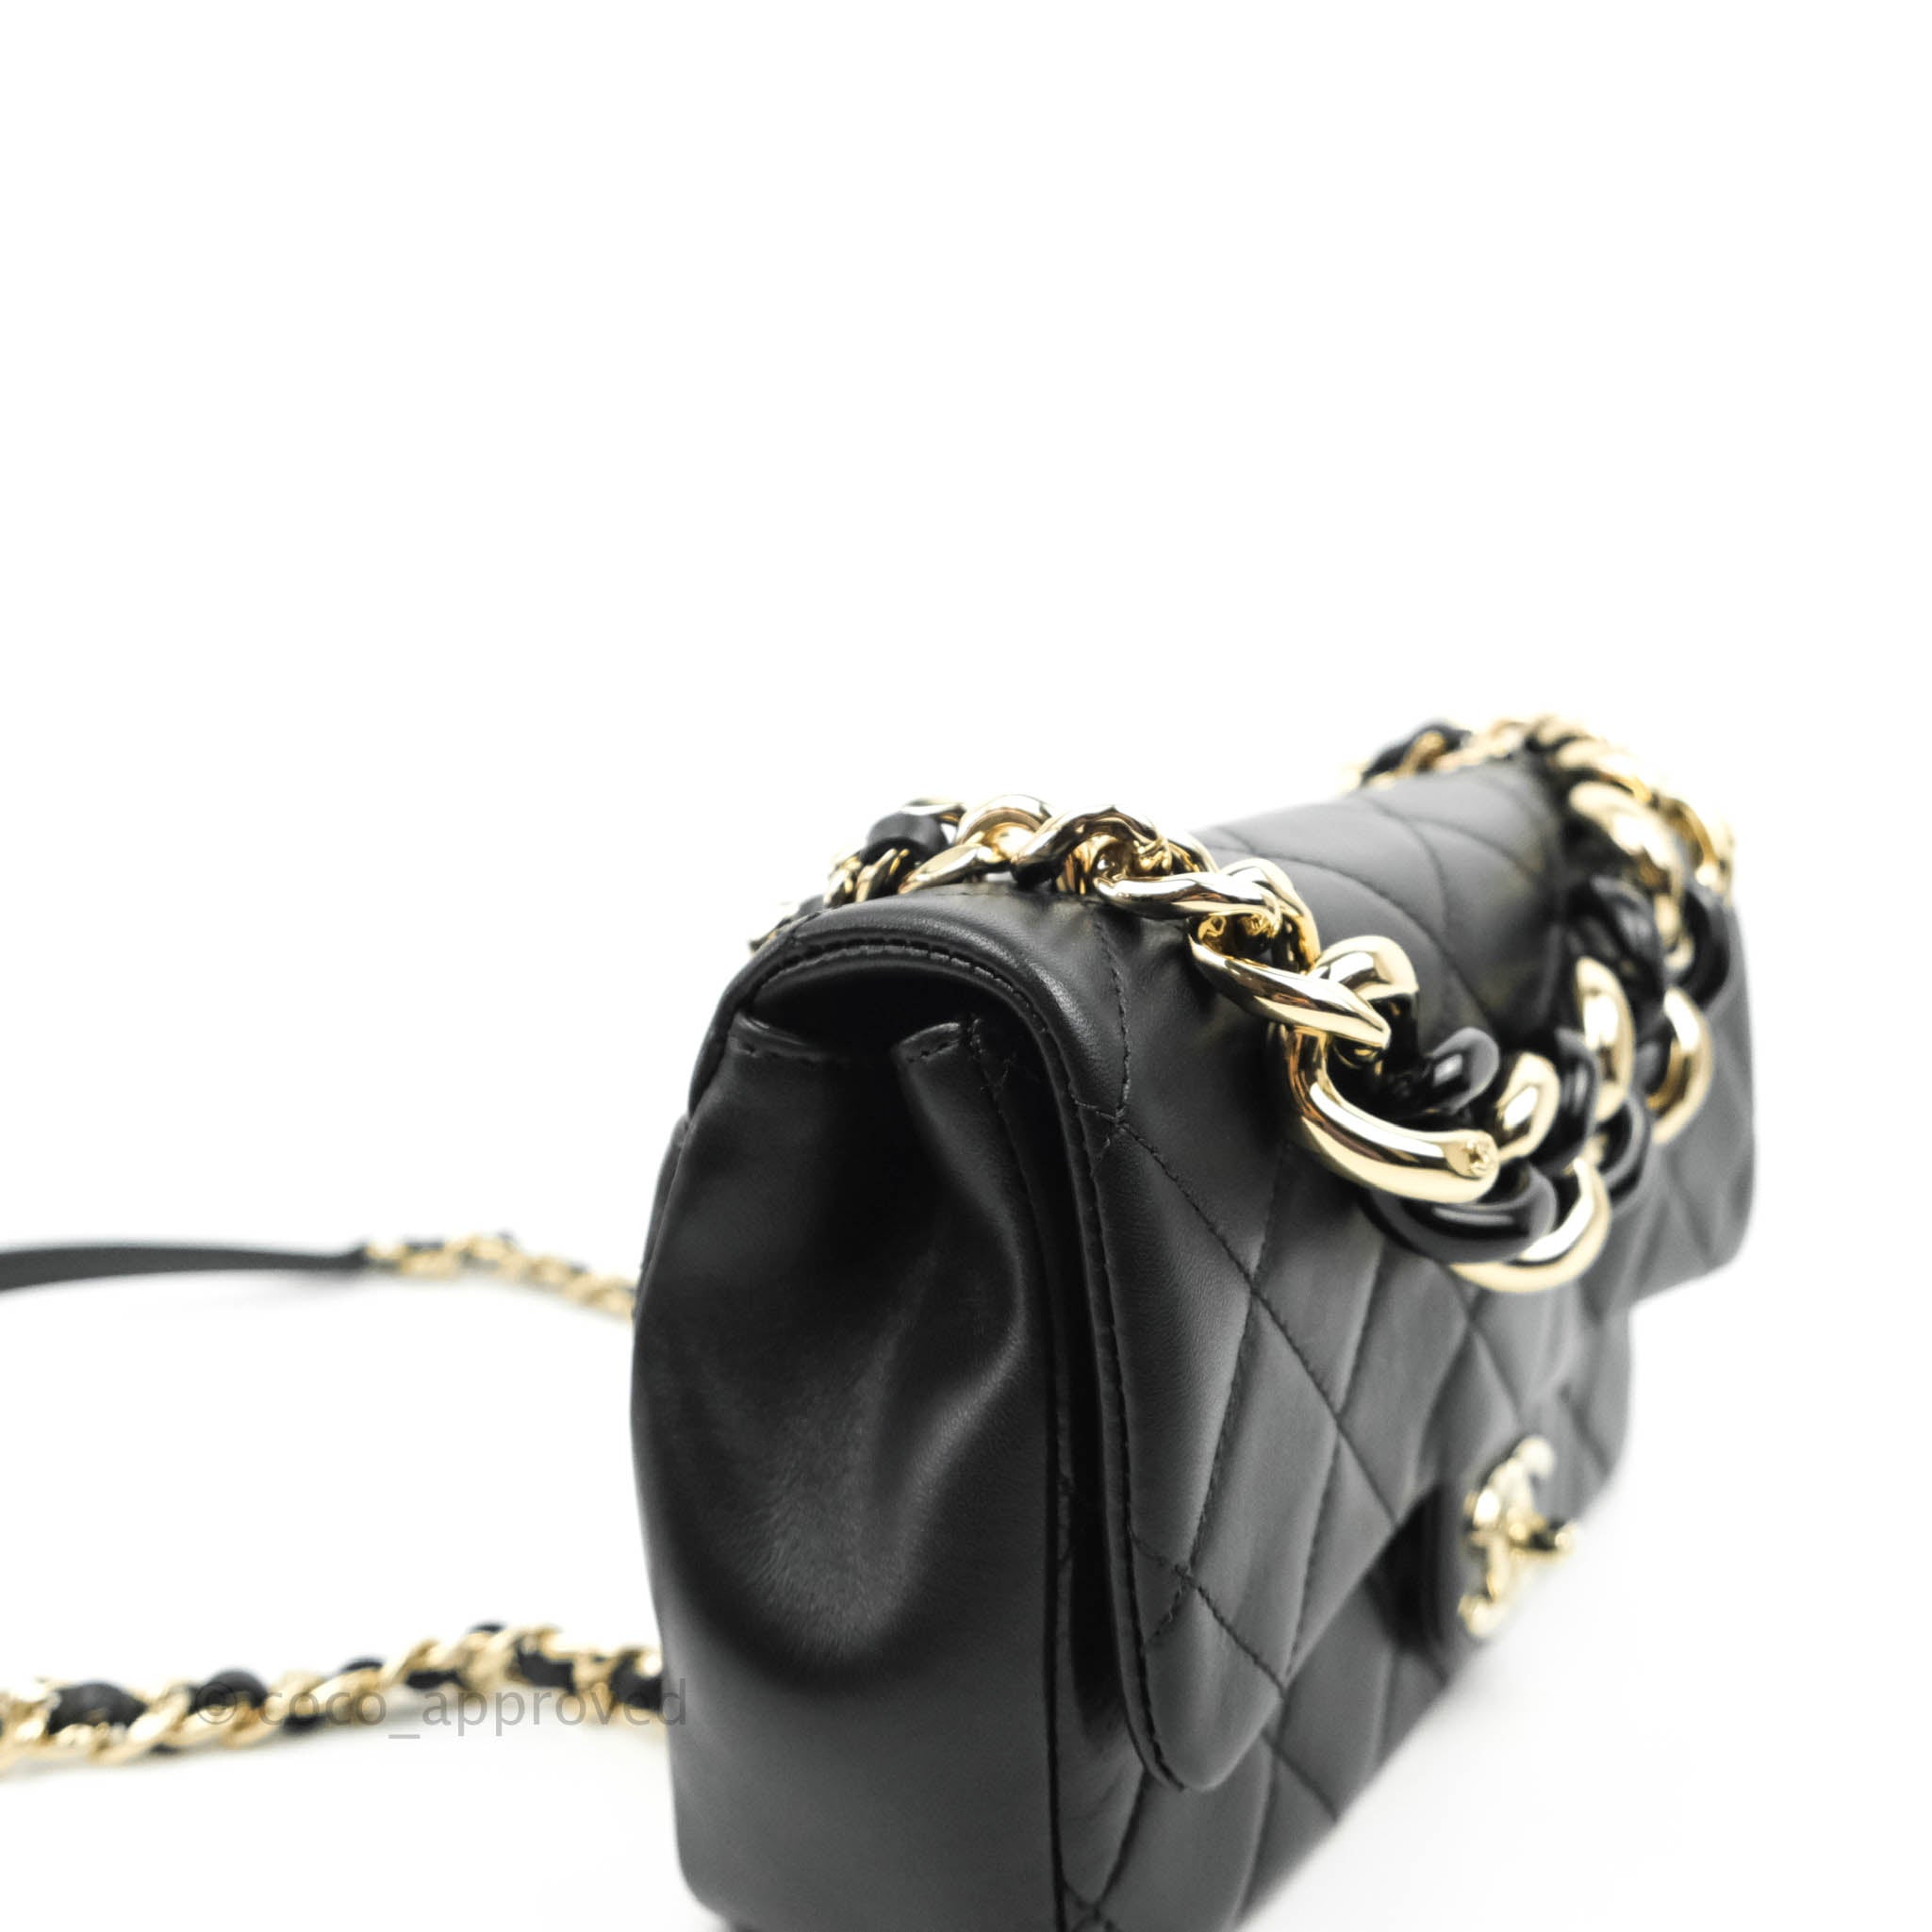 Chanel Quilted Large Resin Bi-Color Chain Flap Bag Black Lambskin – Coco  Approved Studio